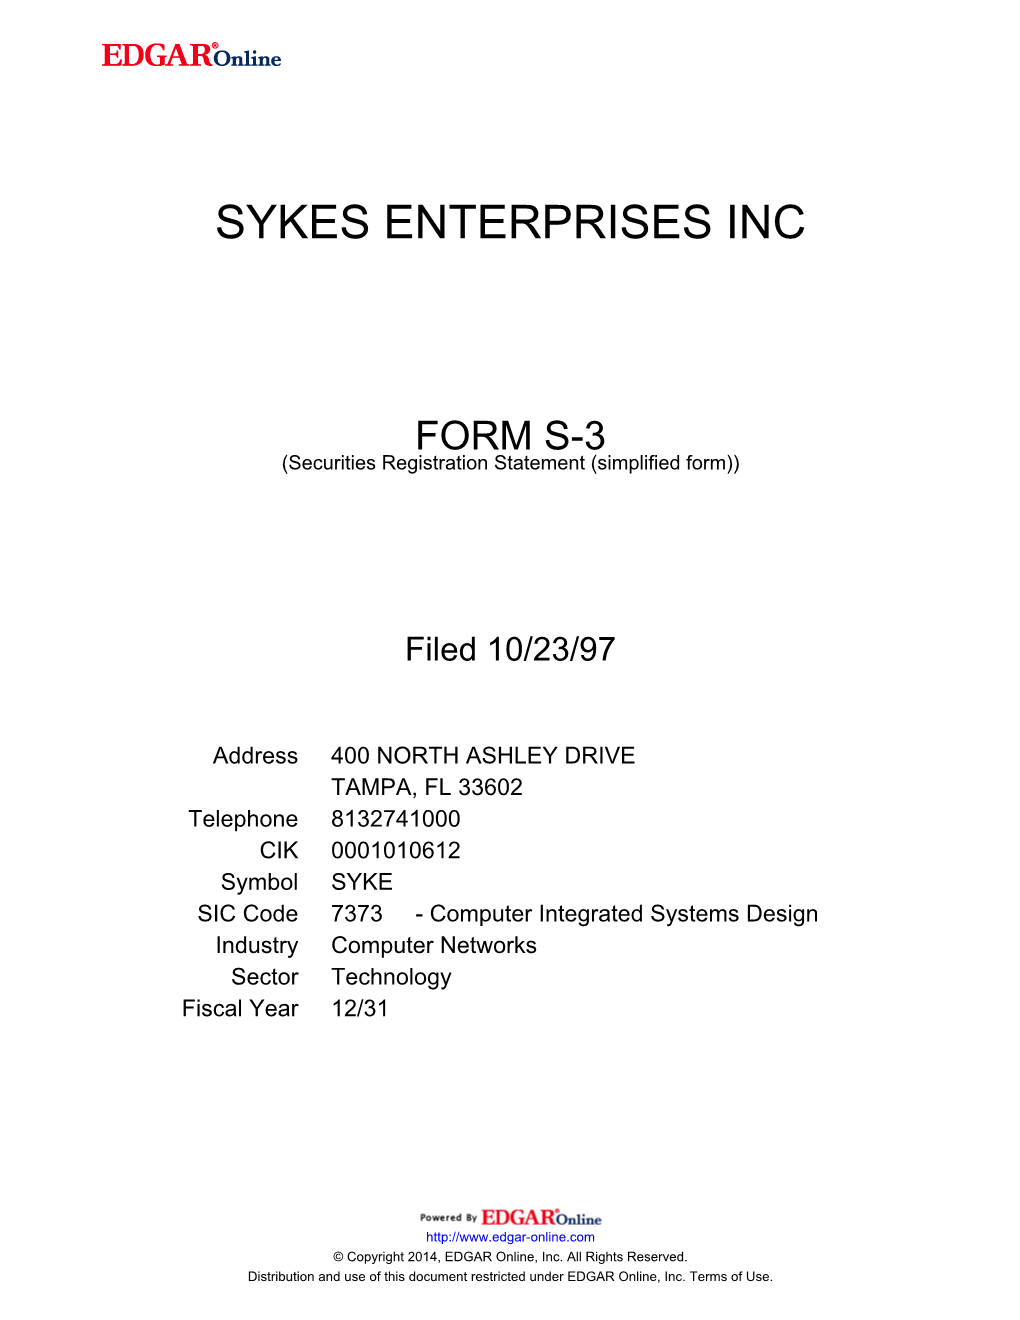 SYKES ENTERPRISES, INCORPORATED (Exact Name of Registrant As Specified in Its Charter)